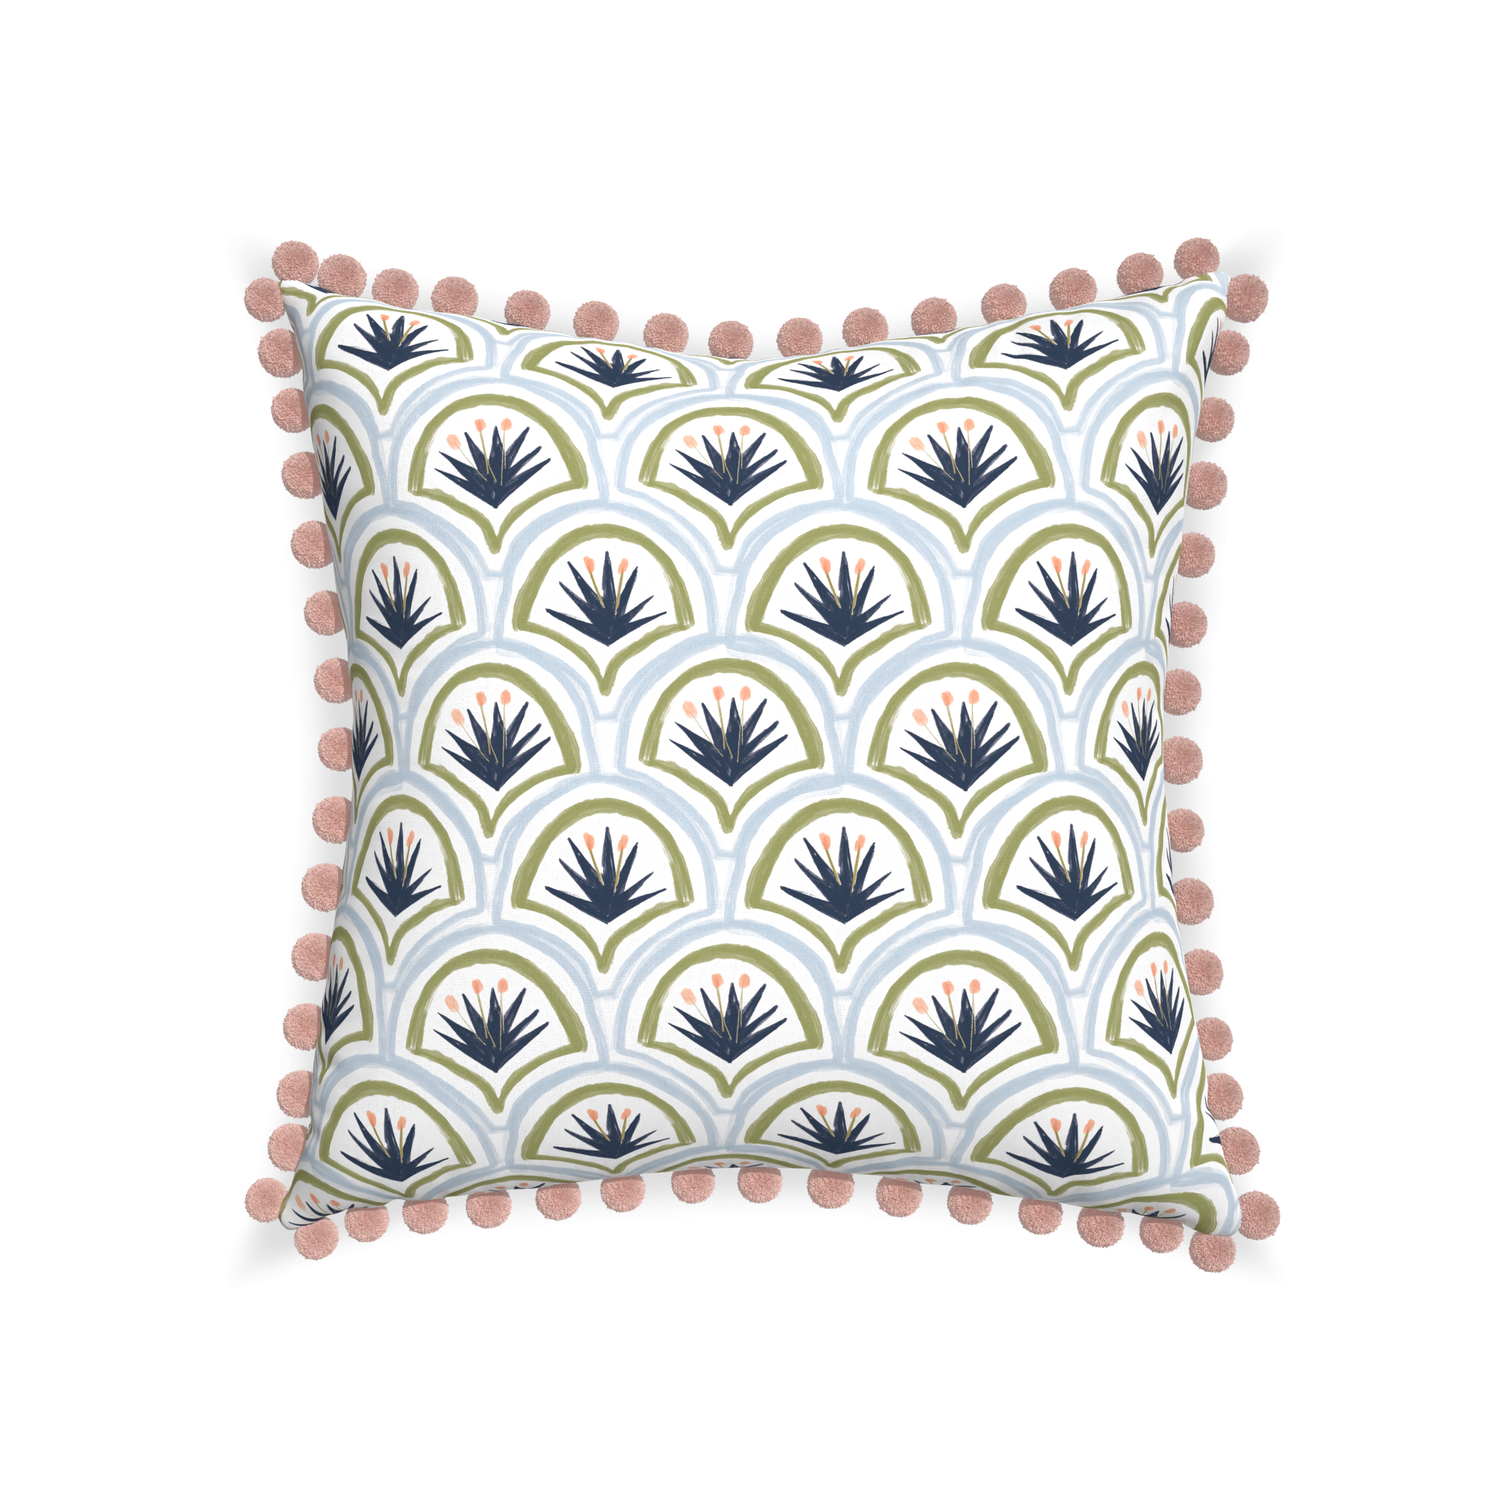 22-square thatcher midnight custom art deco palm patternpillow with rose pom pom on white background